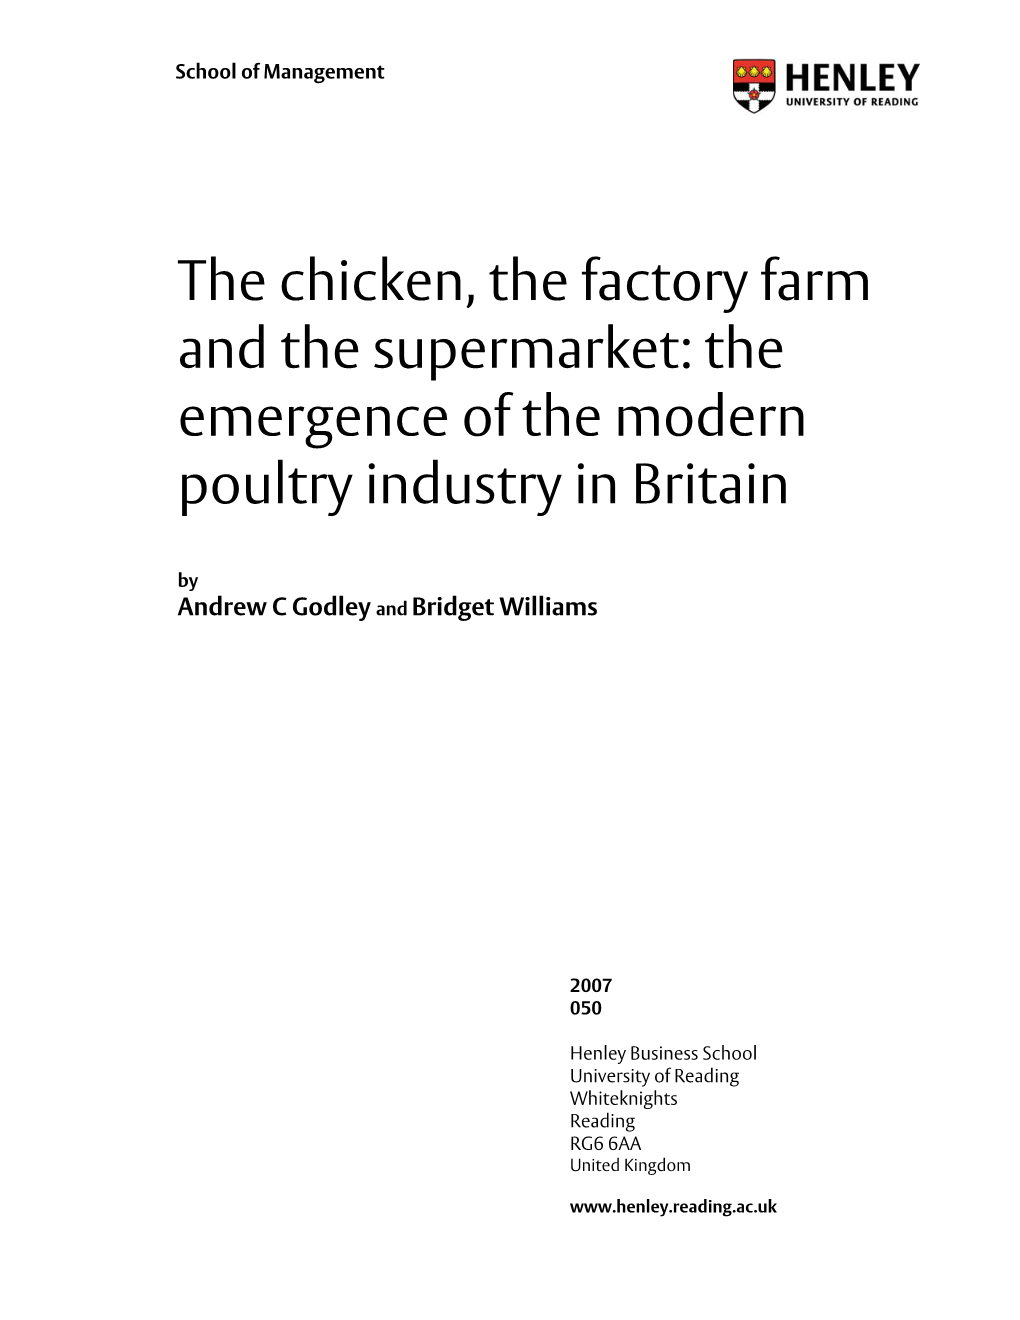 The Emergence of the Modern Poultry Industry in Britain